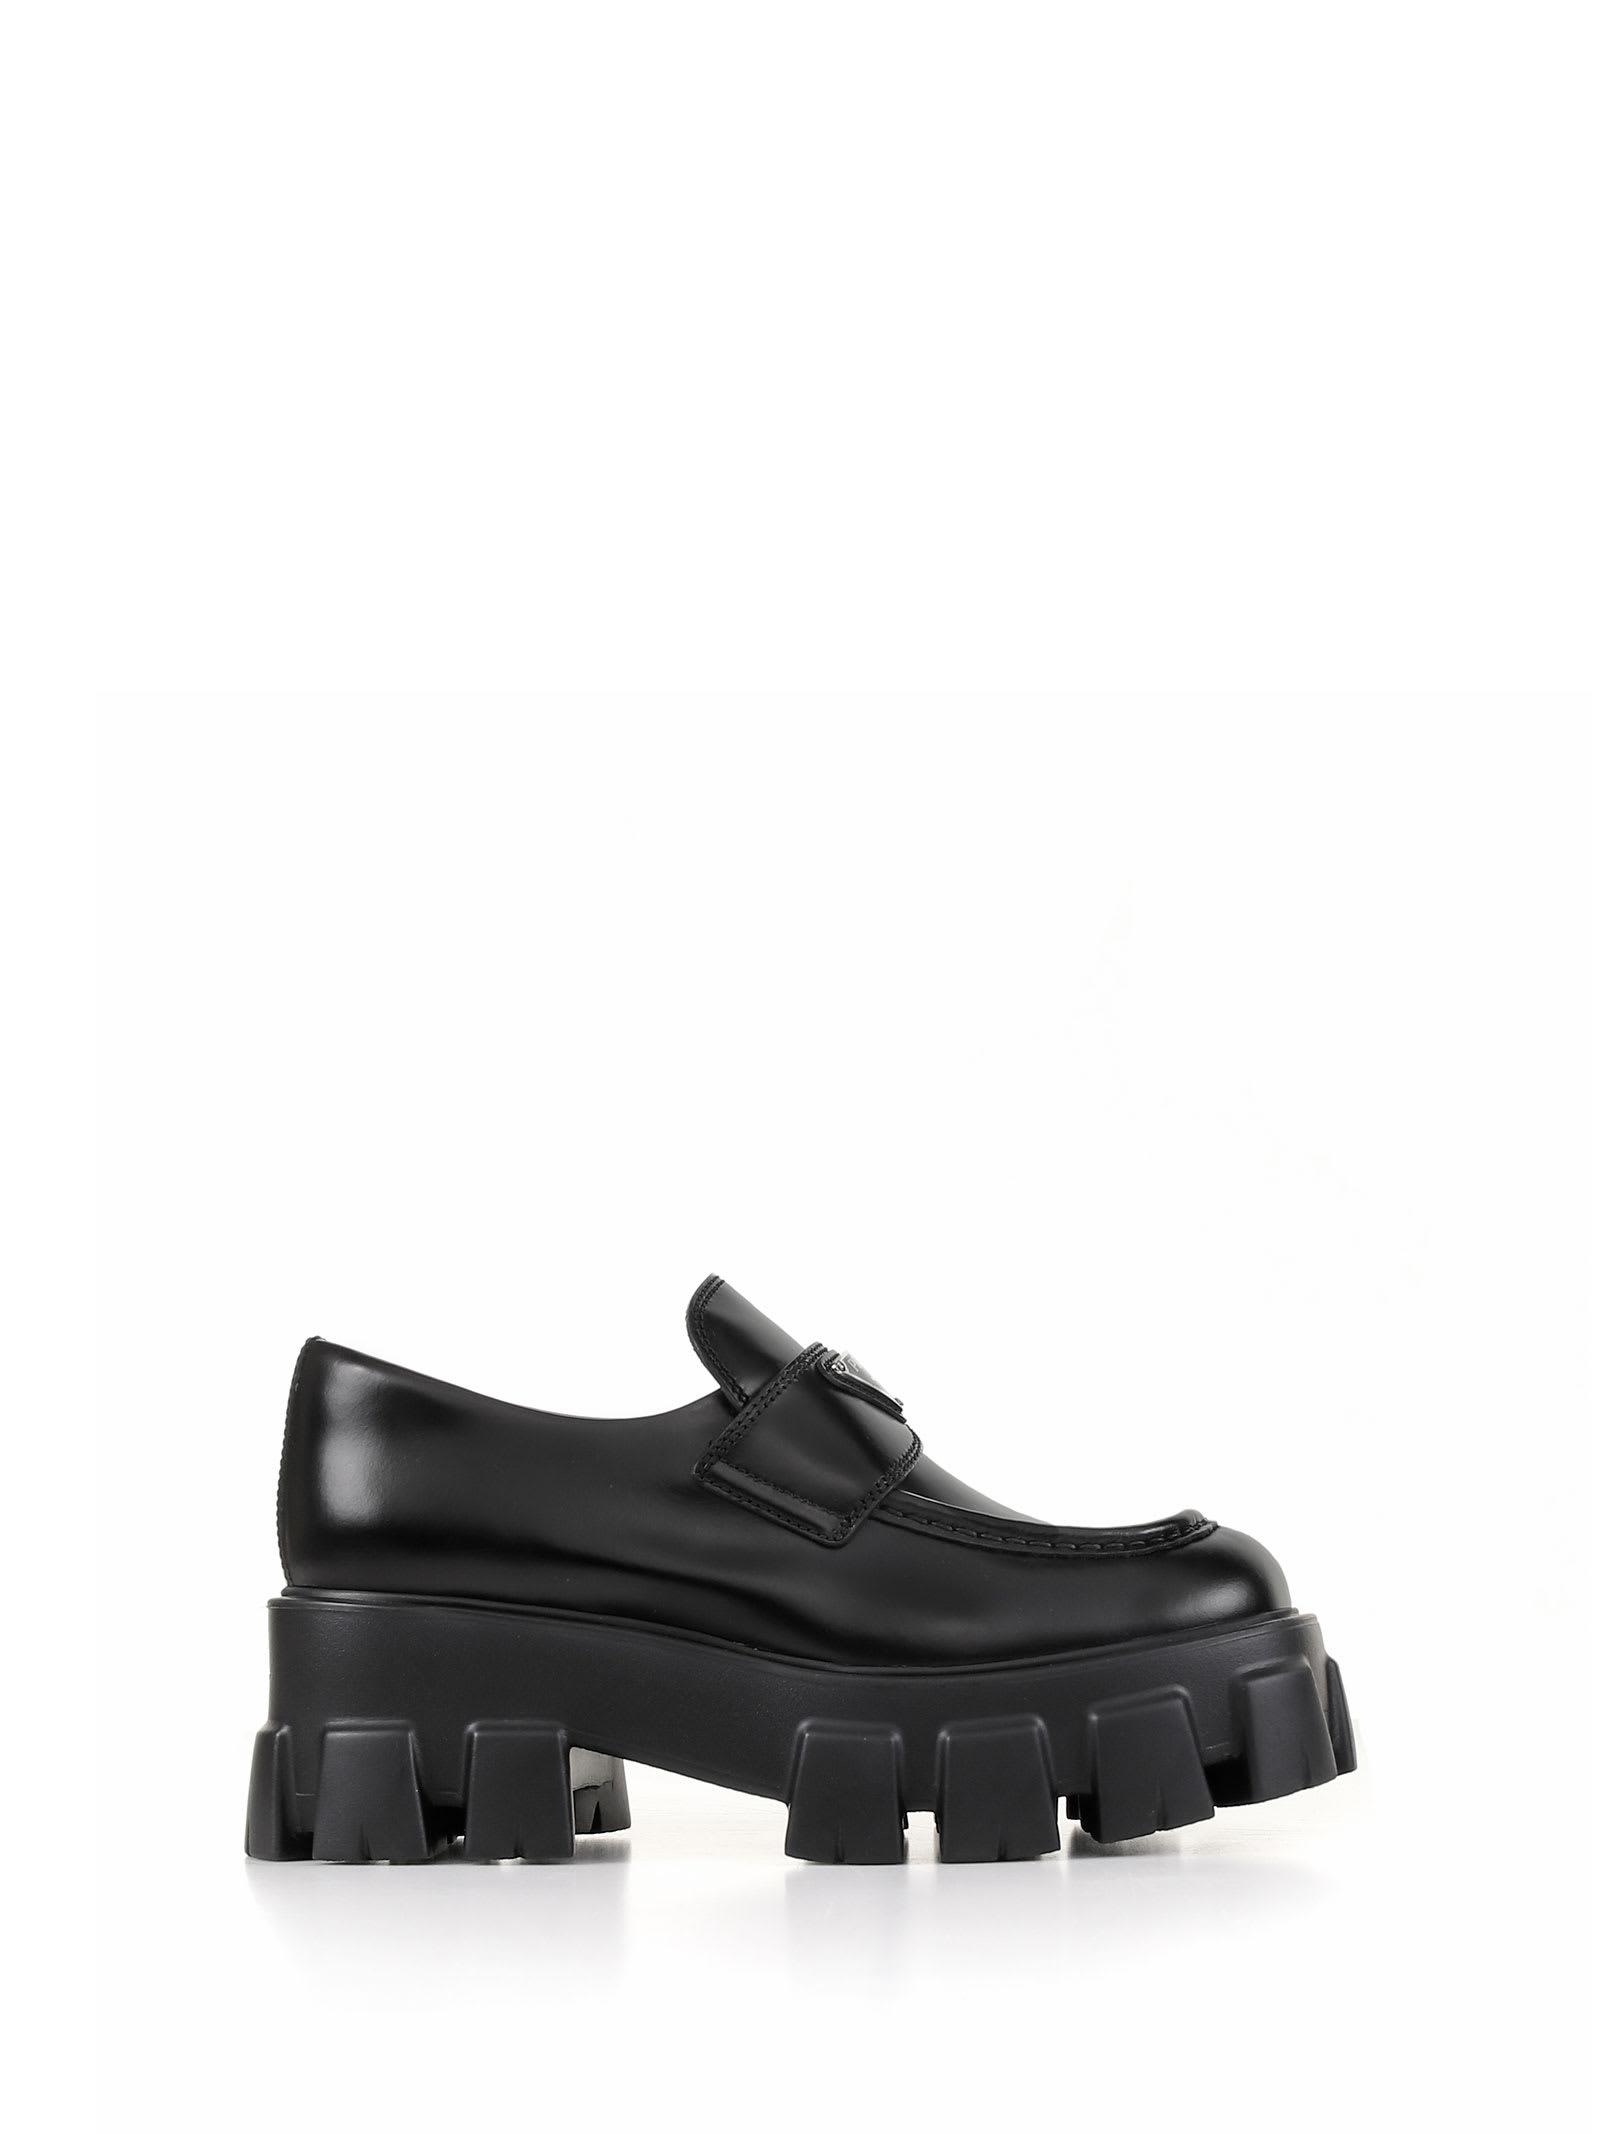 Prada Monolith Leather Loafers in Black | Lyst